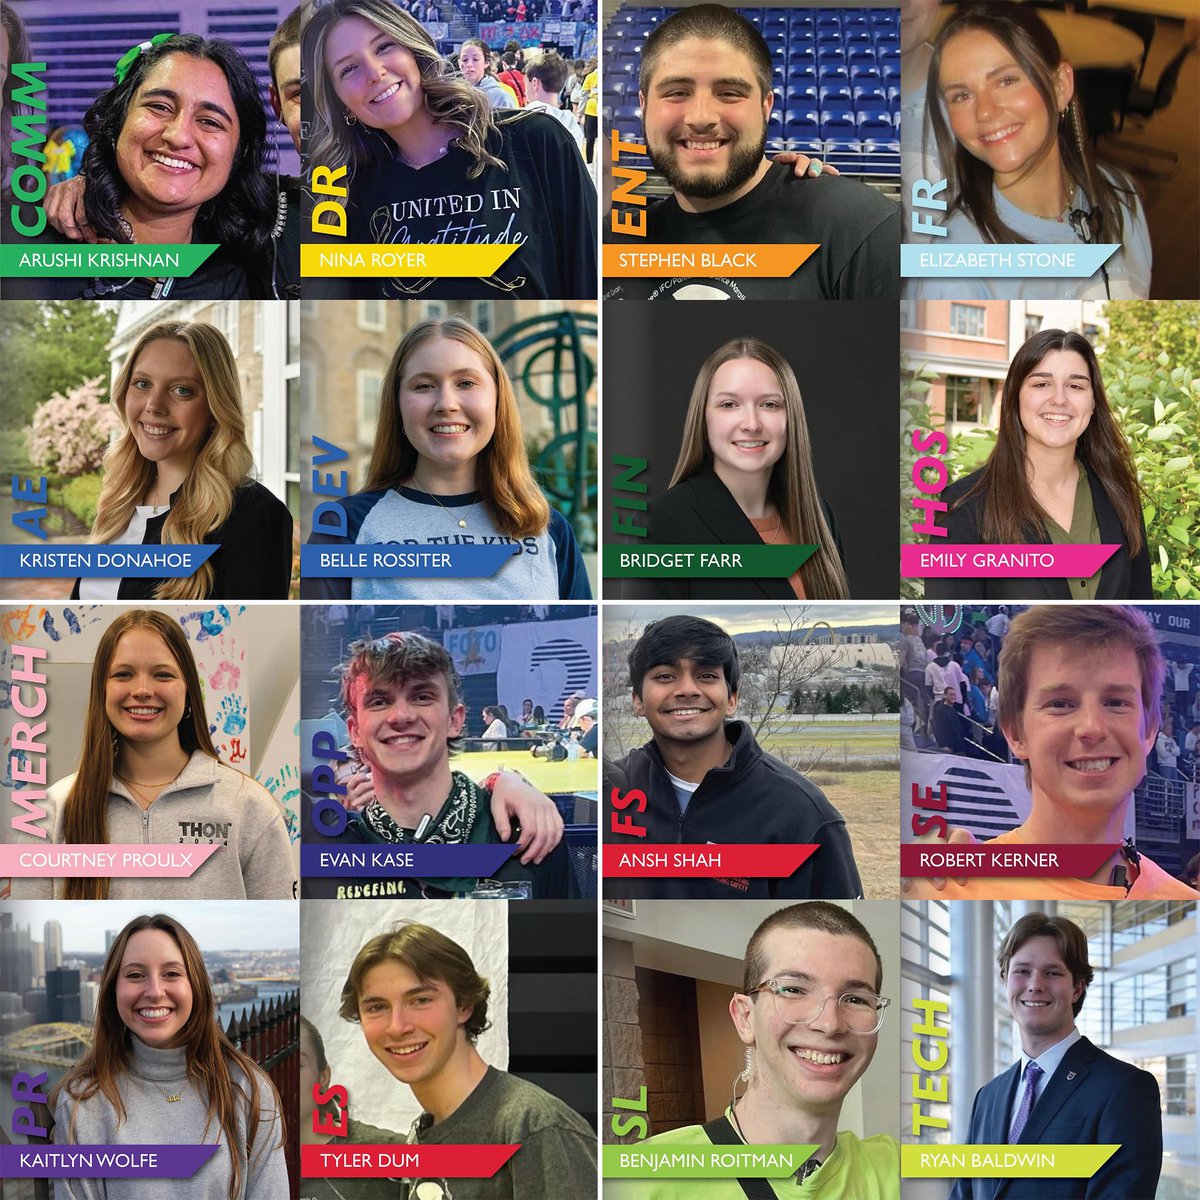 Let’s give a warm welcome to the Penn State THON™ 2025 Executive Committee! 📣 These dedicated individuals who will lead @THON through another incredible year of fundraising, dancing, and making a difference #ForTheKids! 💛 #THON2025 #ConqueringChildhoodCancer